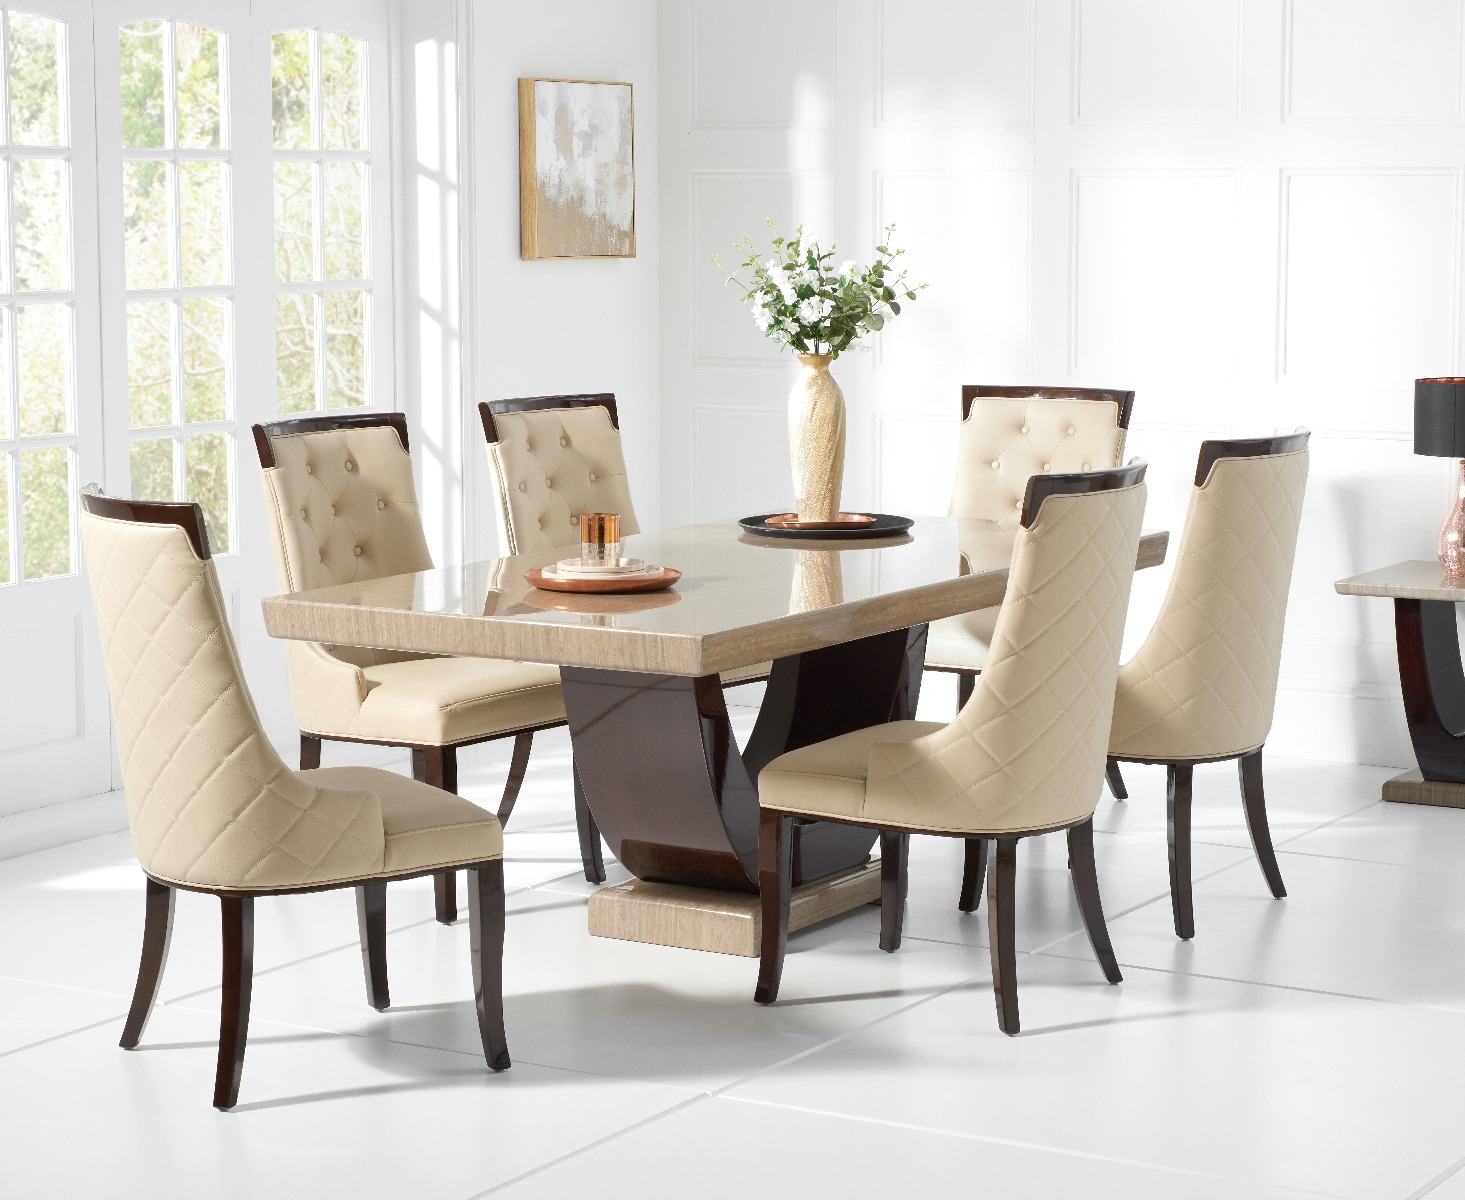 Photo 1 of Novara 170cm brown pedestal marble dining table with 6 grey francesca chairs